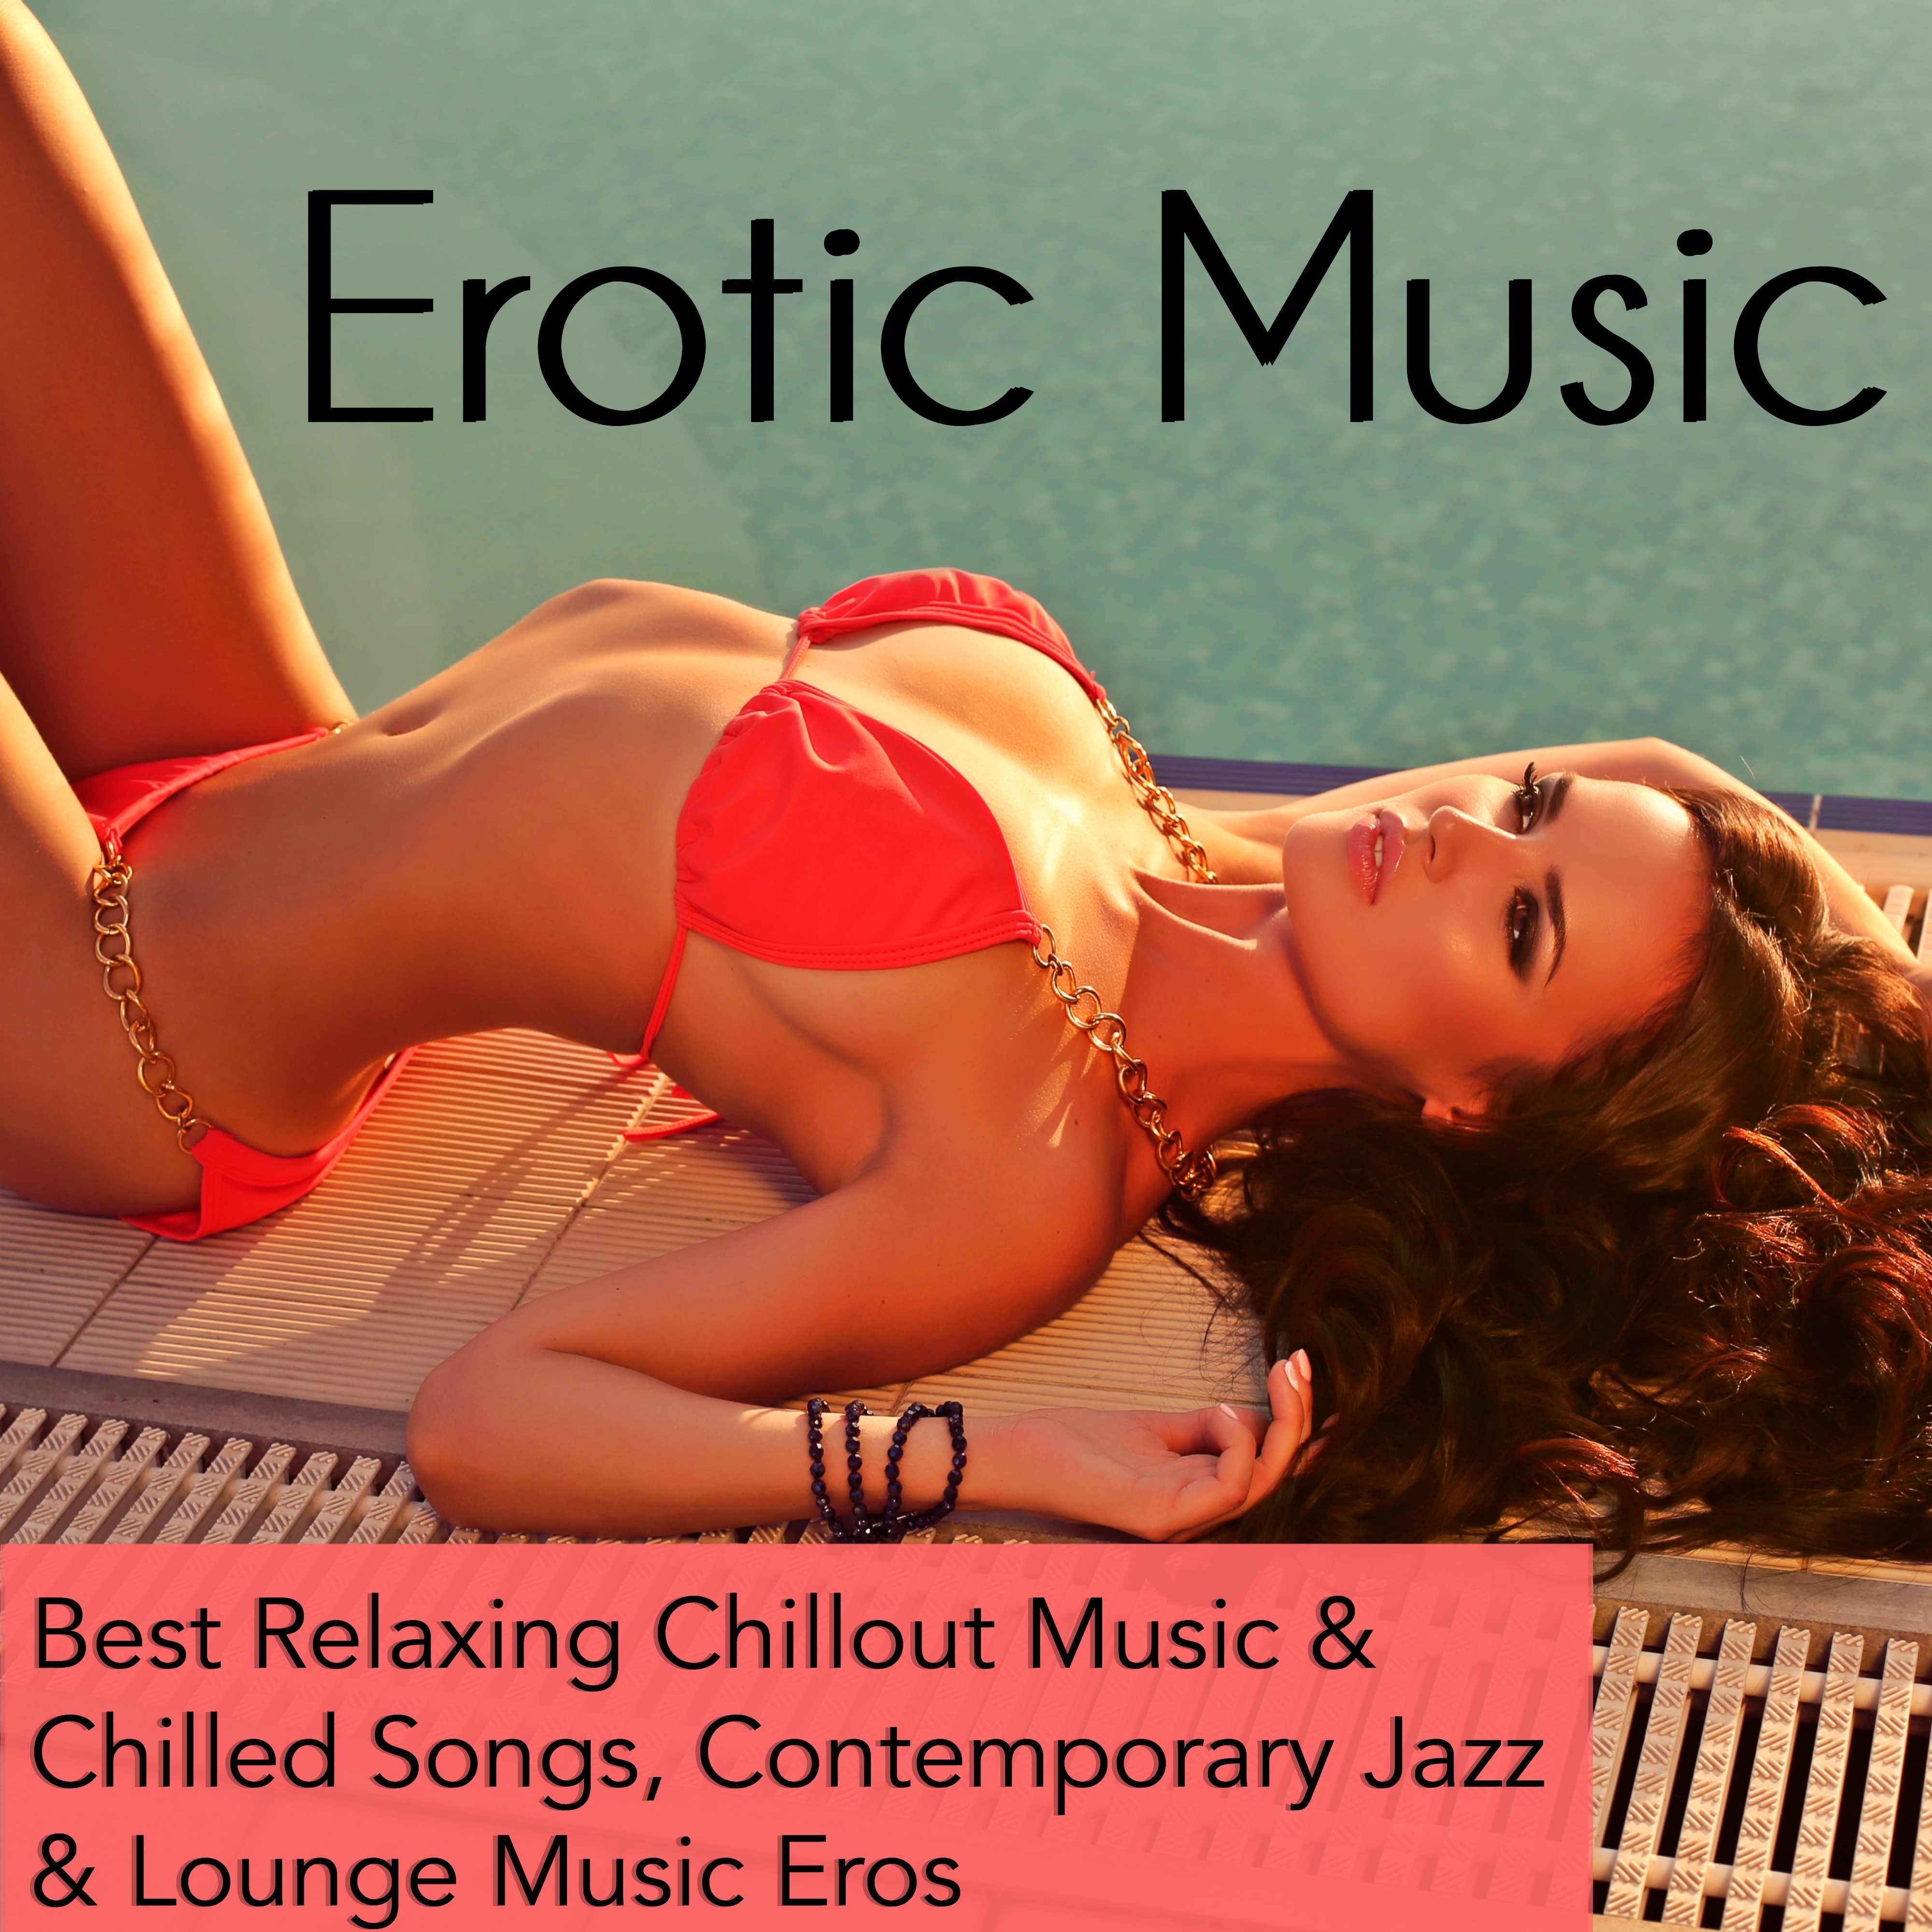 Erotic Music - Best Relaxing Chillout Music & Chilled Songs, Contemporary Jazz & Lounge Music Eros